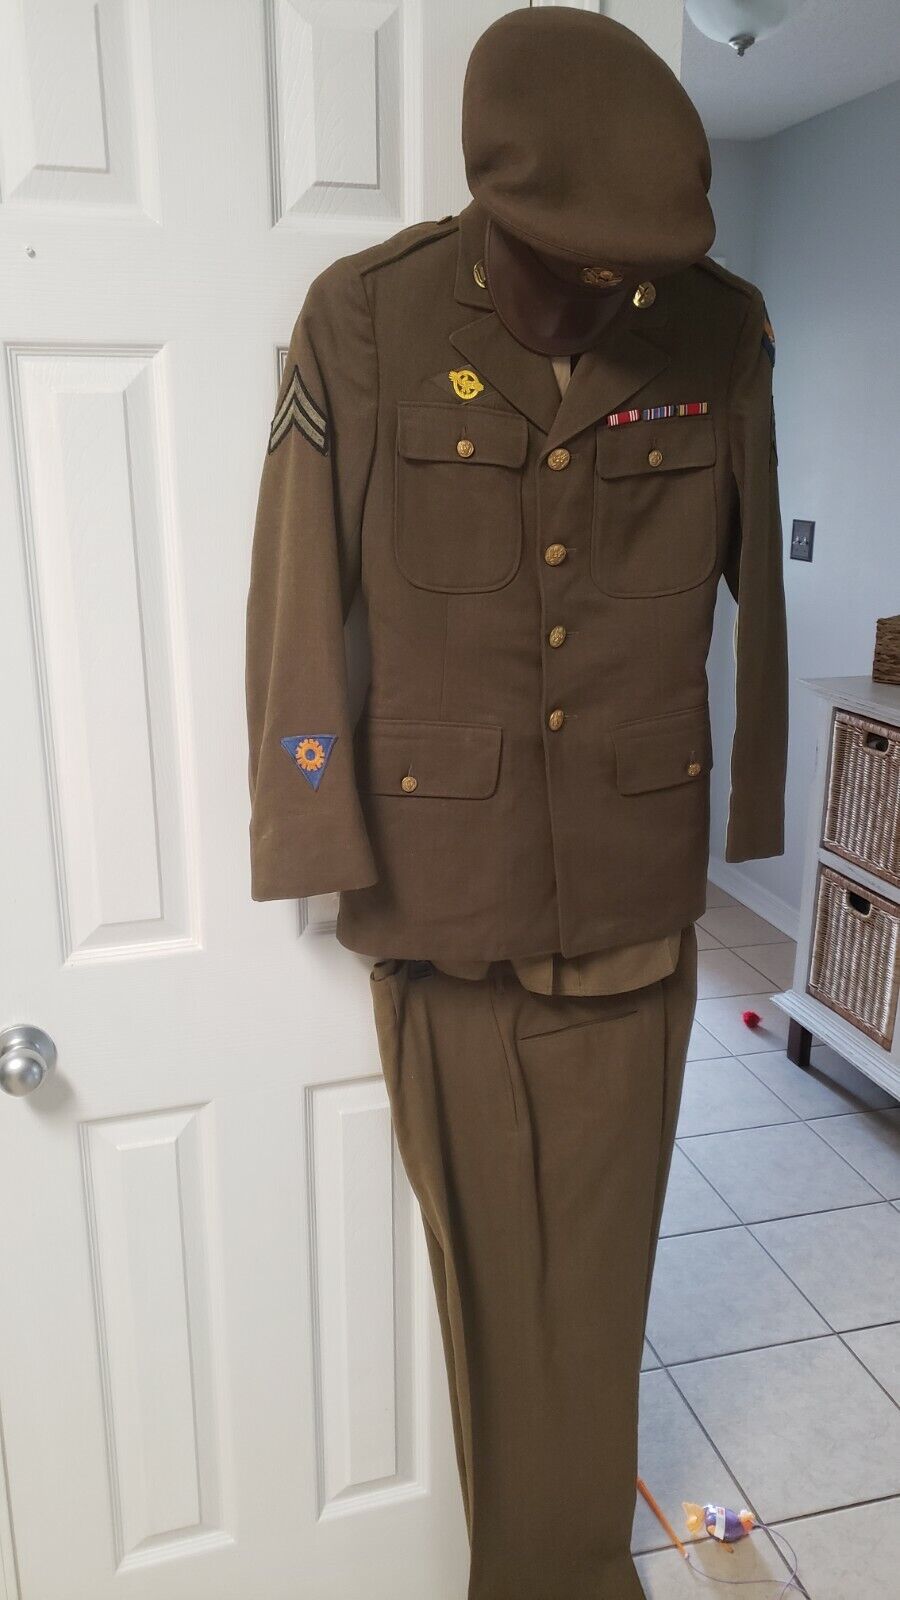 Original WW2 US Army Enlisted four pocket Olive Drab Uniform and enlisted  hat.